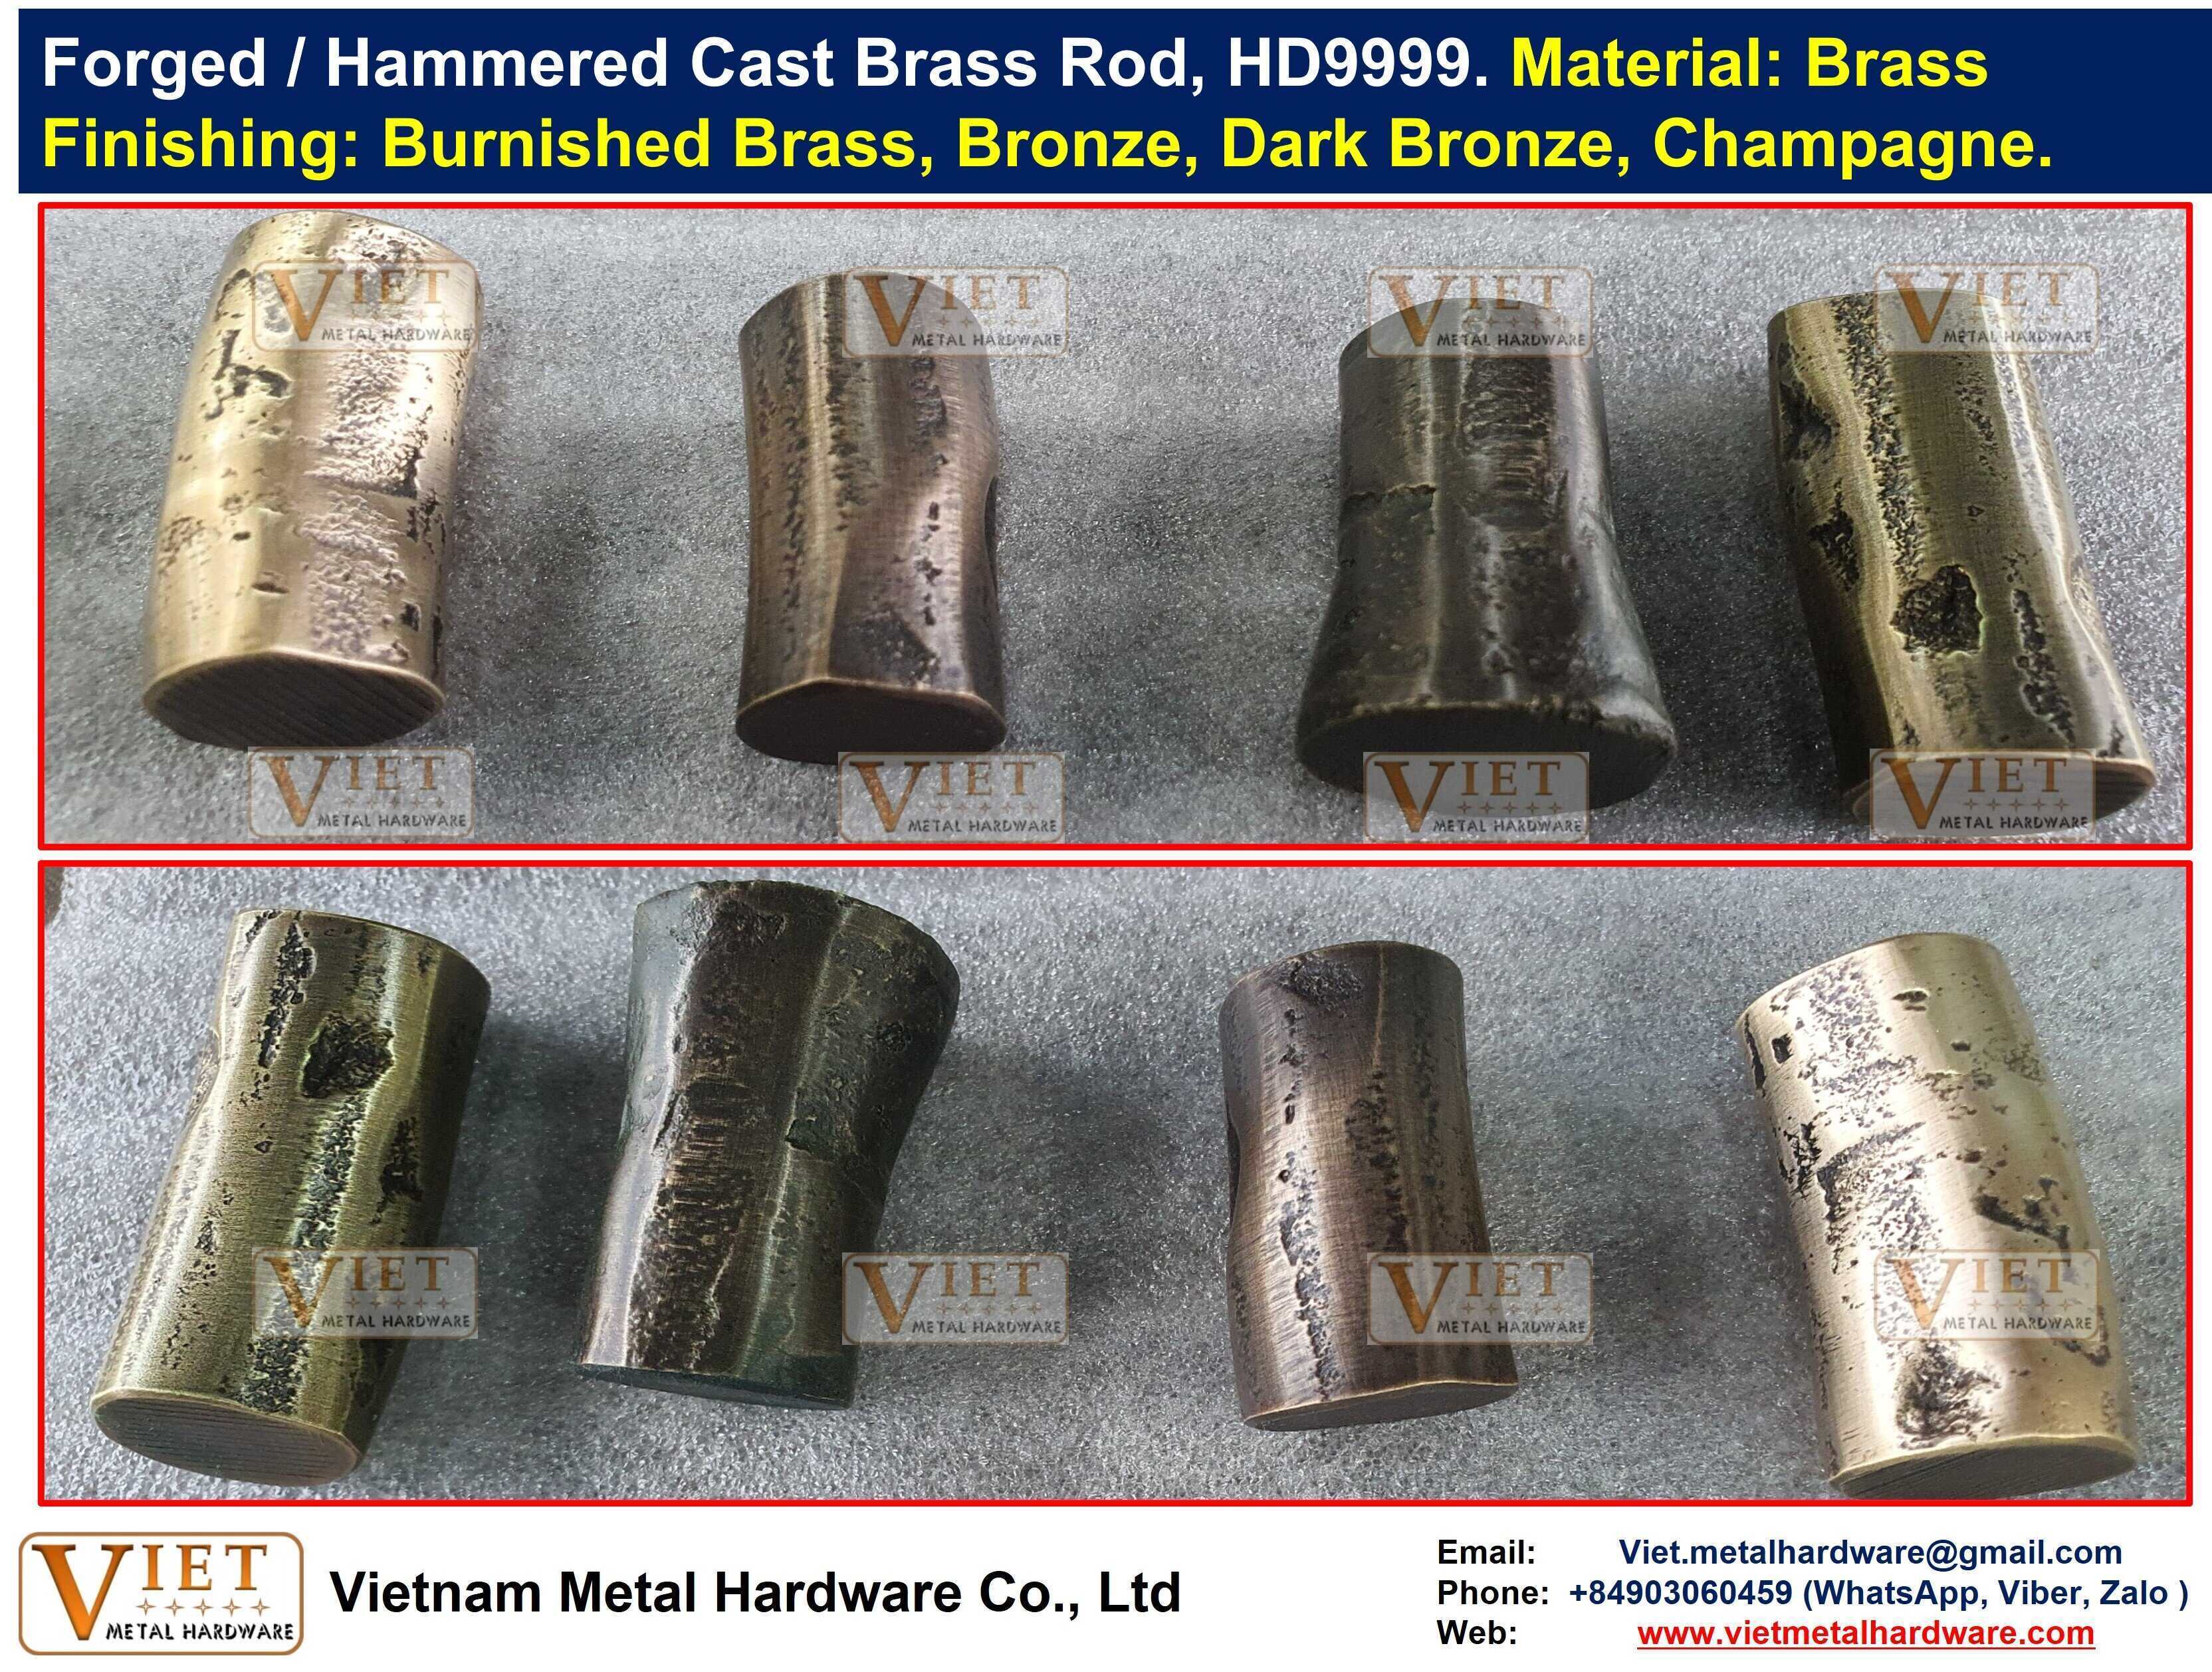 Forged / Hammered Casted Brass Rod, HD9999A. Burnished Brass - VIETNAM  METAL HARDWARE CO., LTD